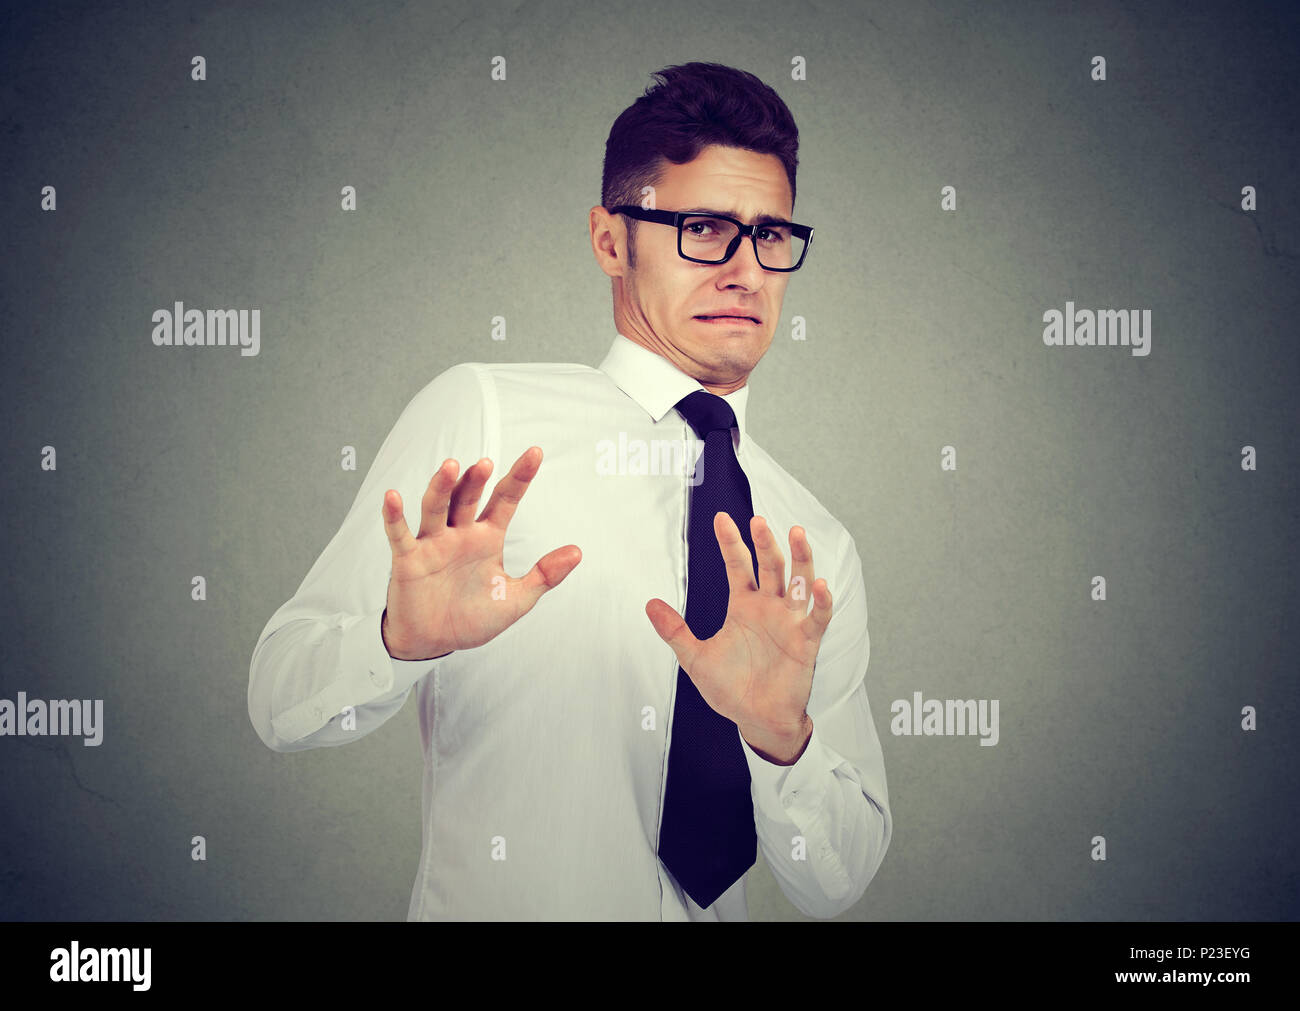 Disgusted young business man isolated on gray background Stock Photo